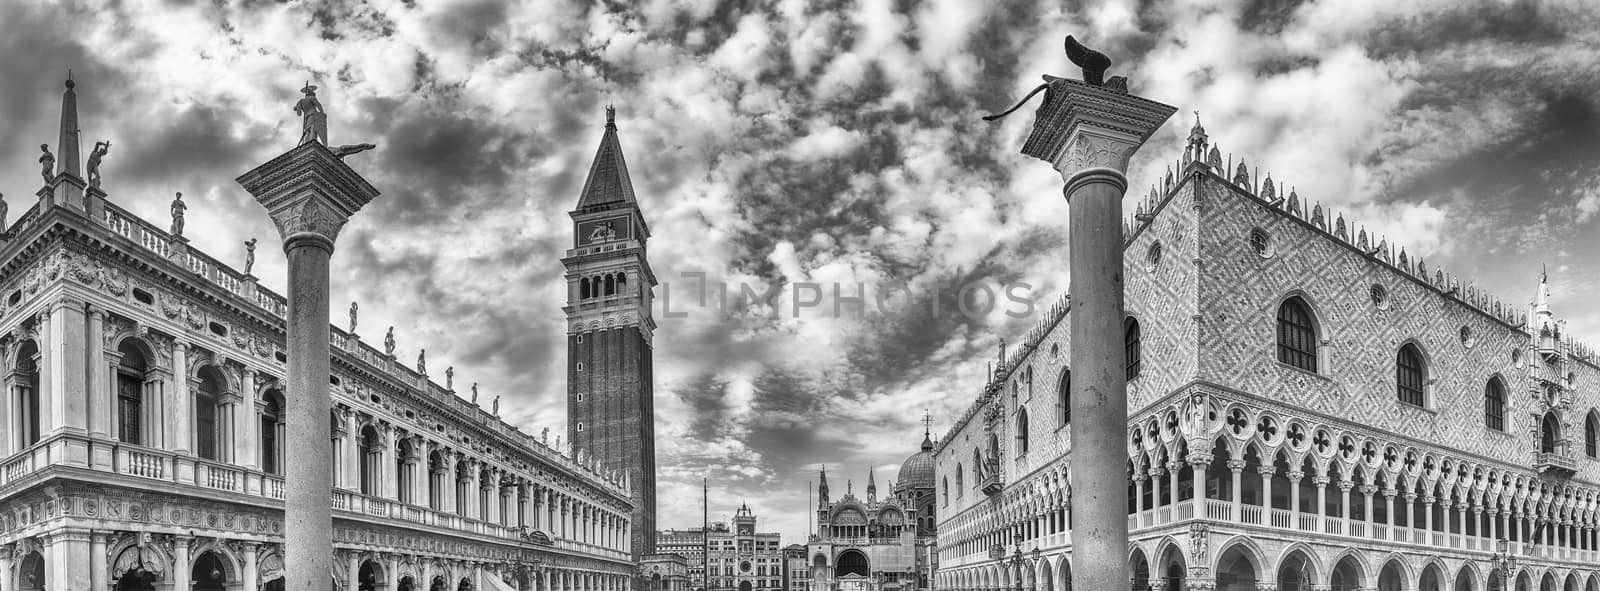 View of the buildings in St. Mark's Square, Venice, Italy by marcorubino